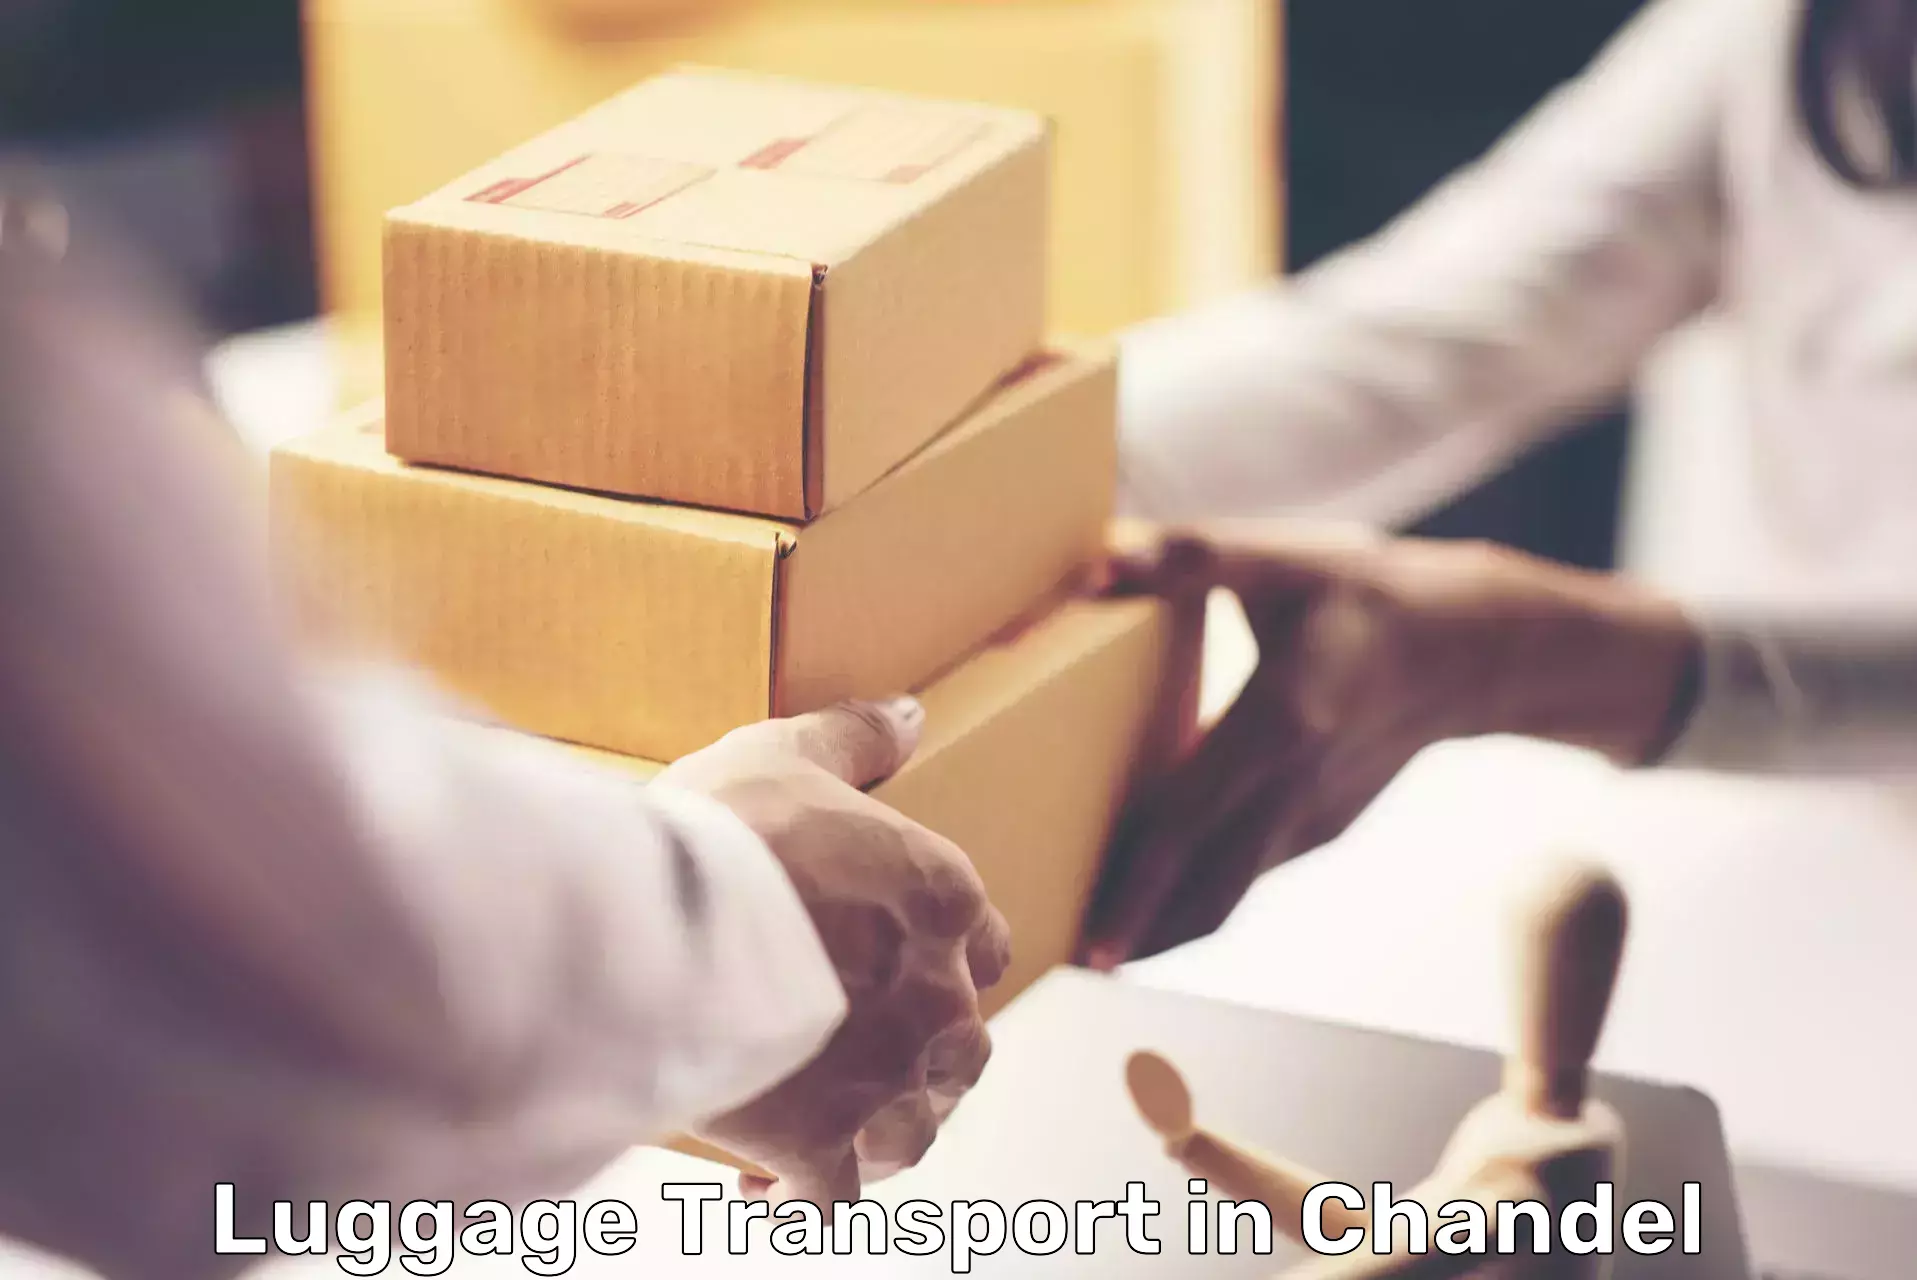 Domestic luggage transport in Chandel